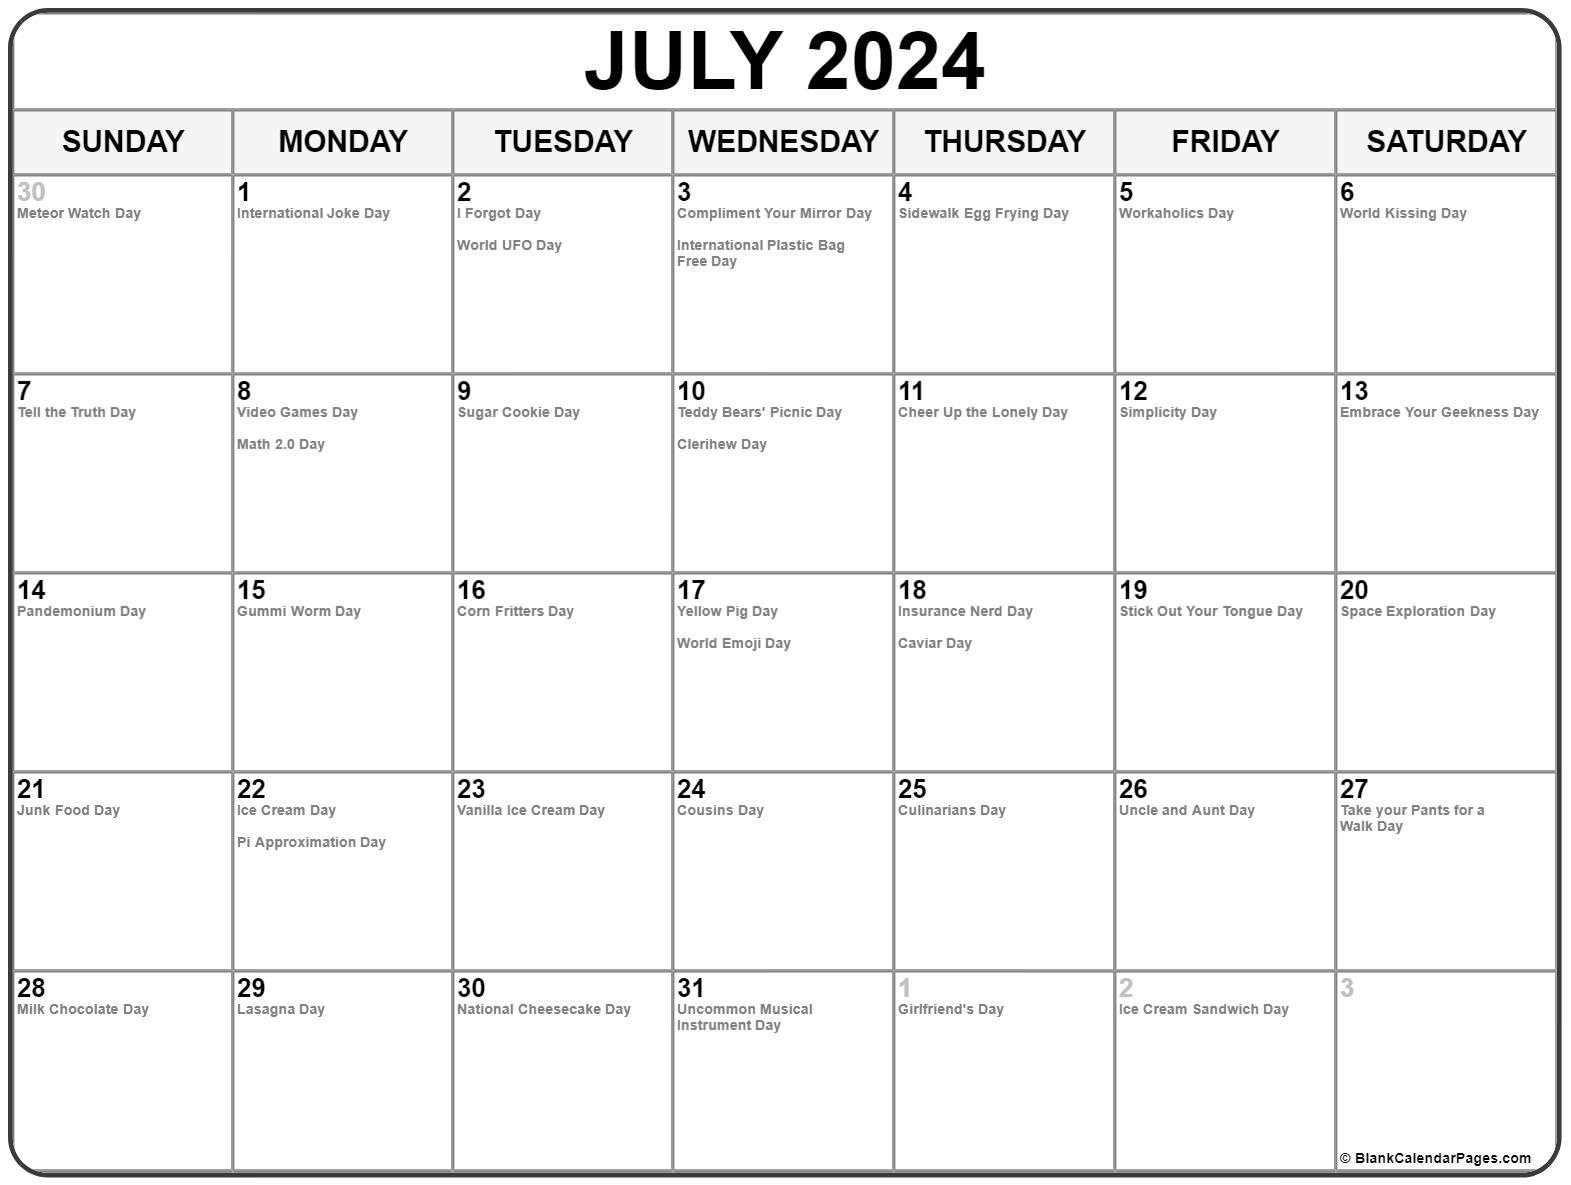 July 2024 With Holidays Calendar throughout July Fun Holiday Calendar 2024